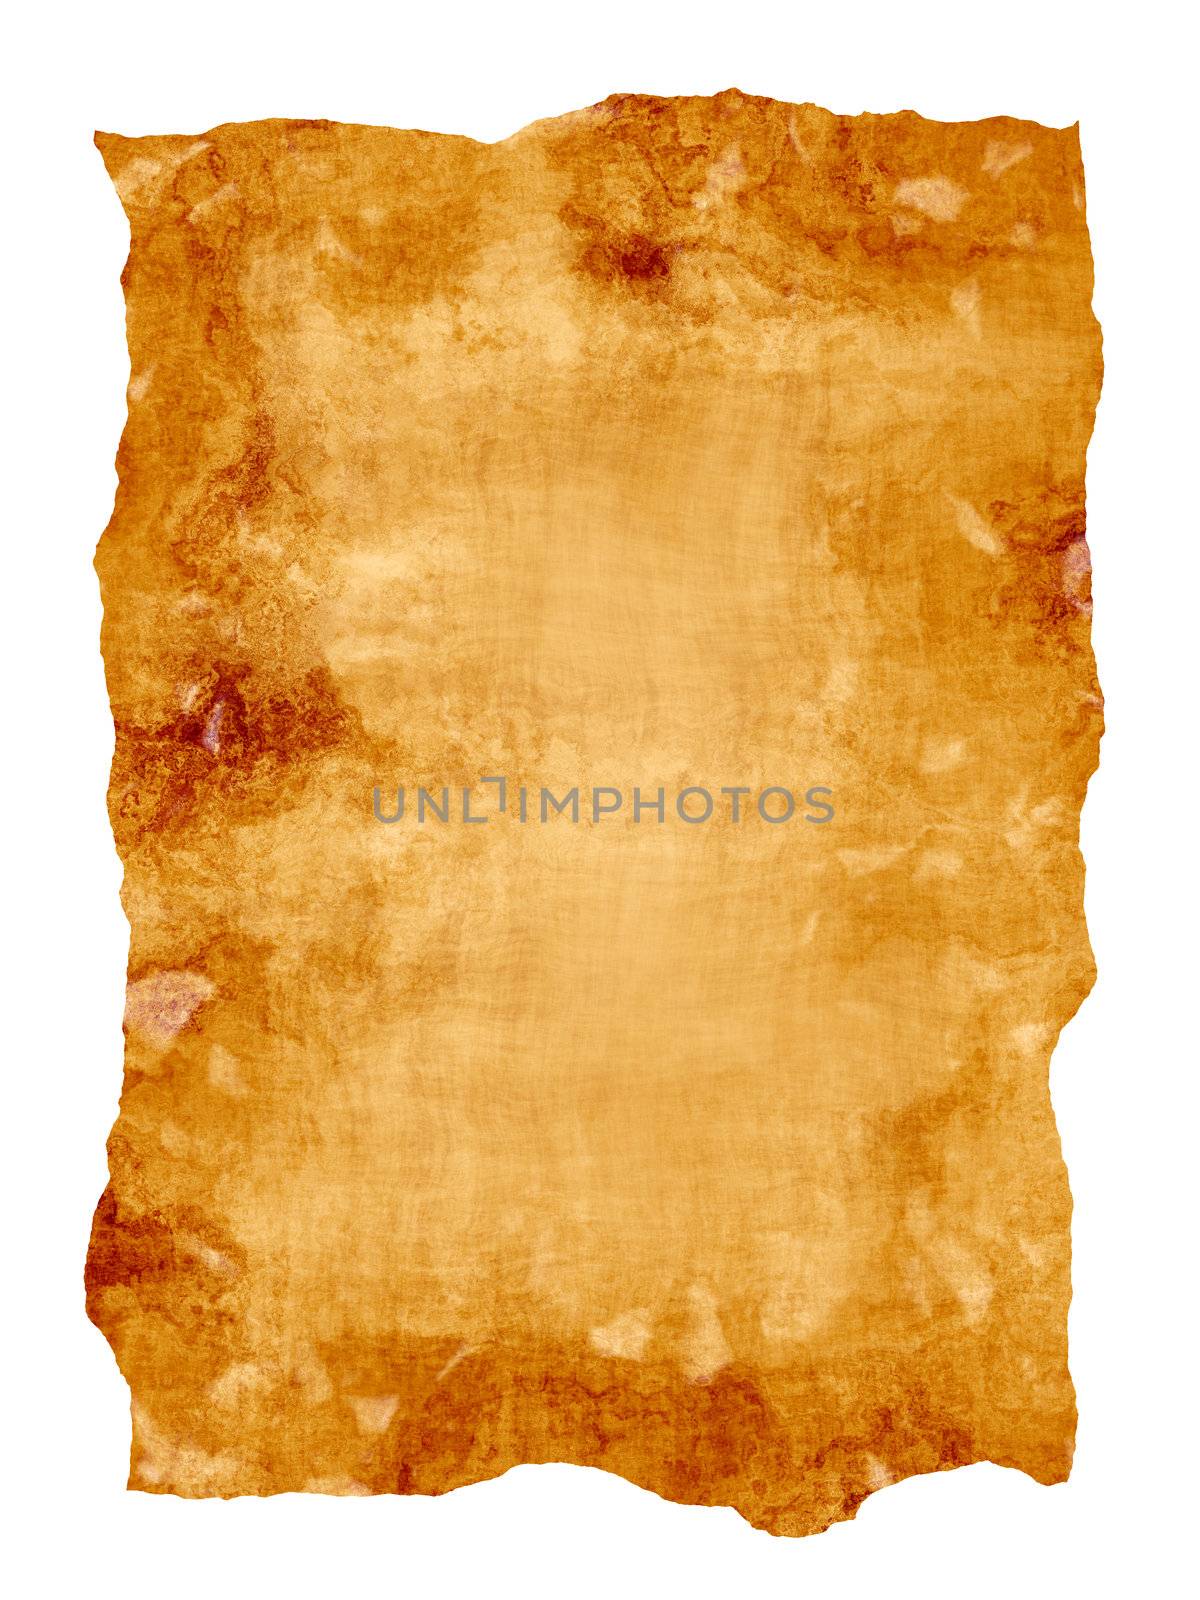 old paper or parchment document isolated over white